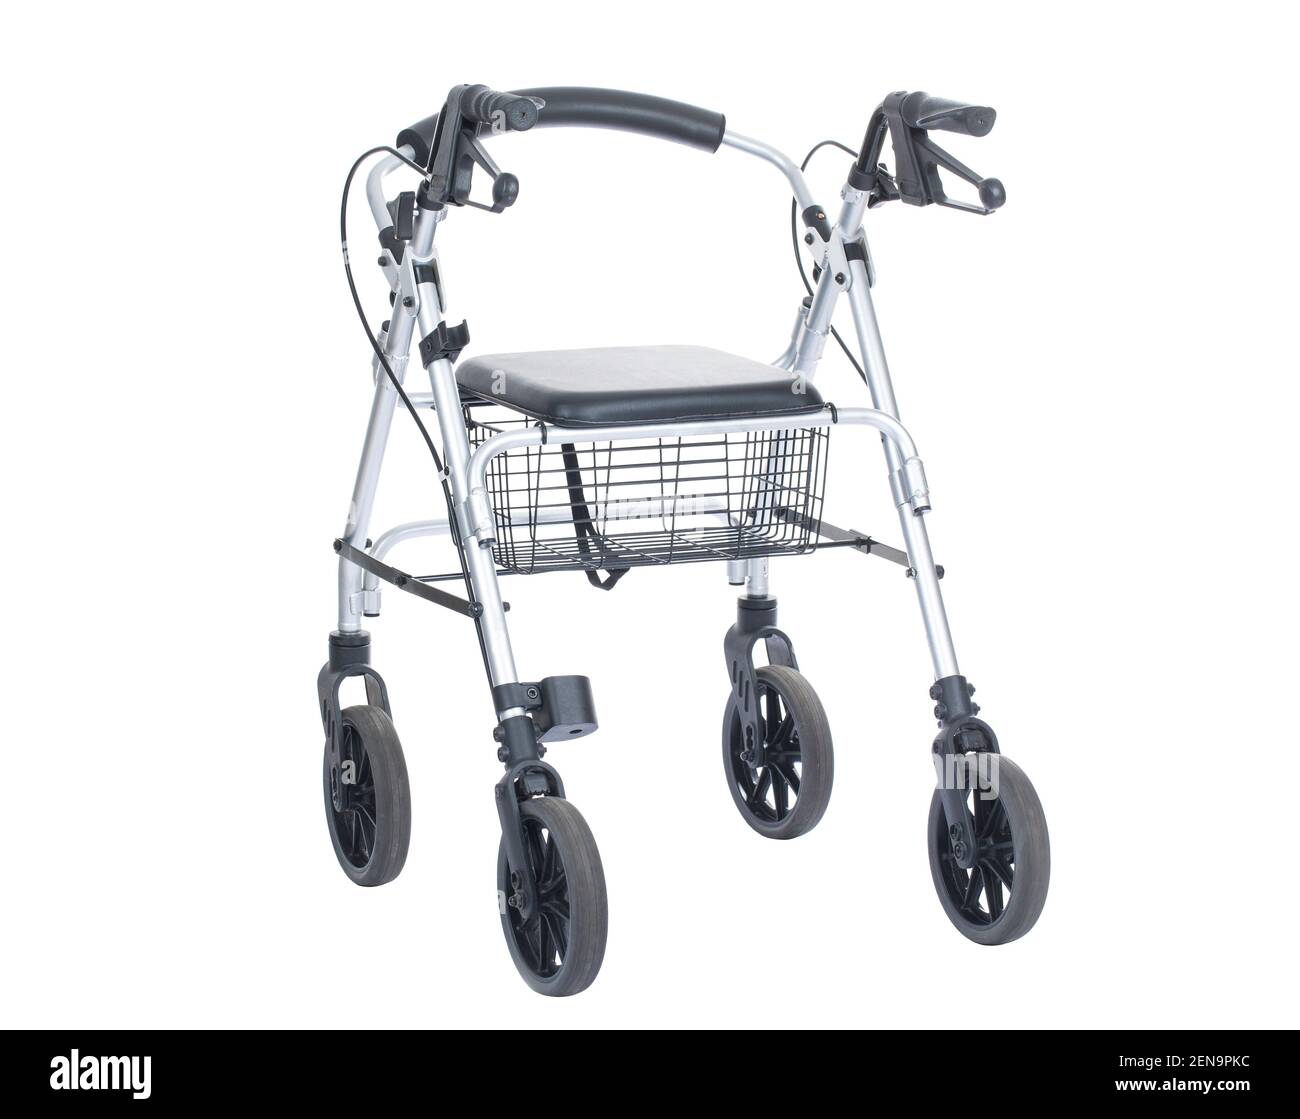 Rollator walking aid frame with four wheels, a seat and handlebars, elderly walking aid concept Stock Photo